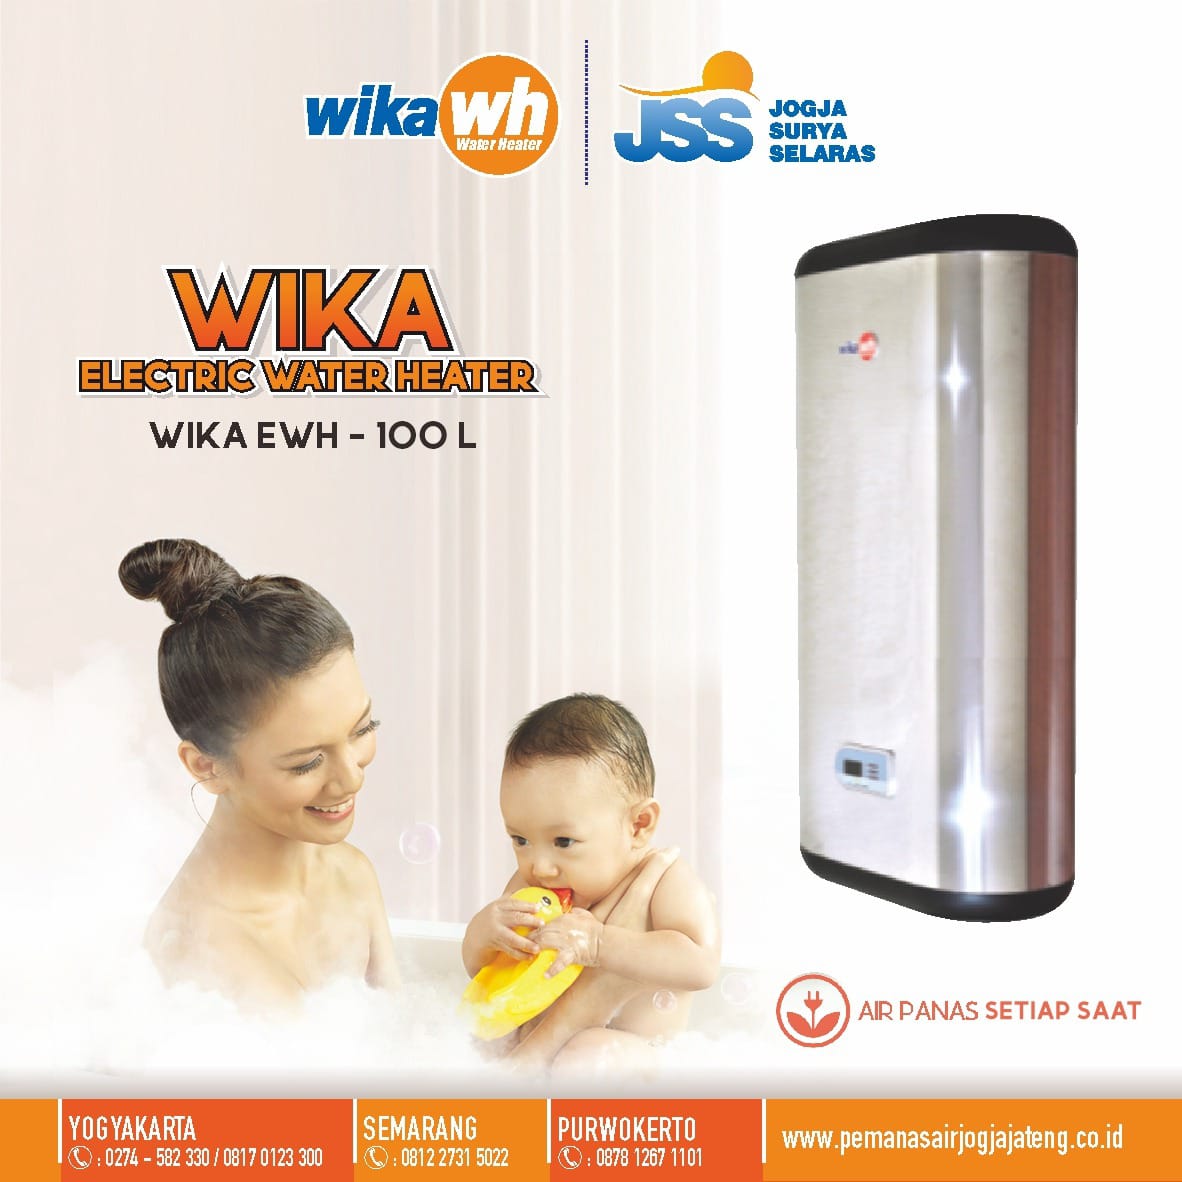 WIKA Electric Water Heater ET 100 FV